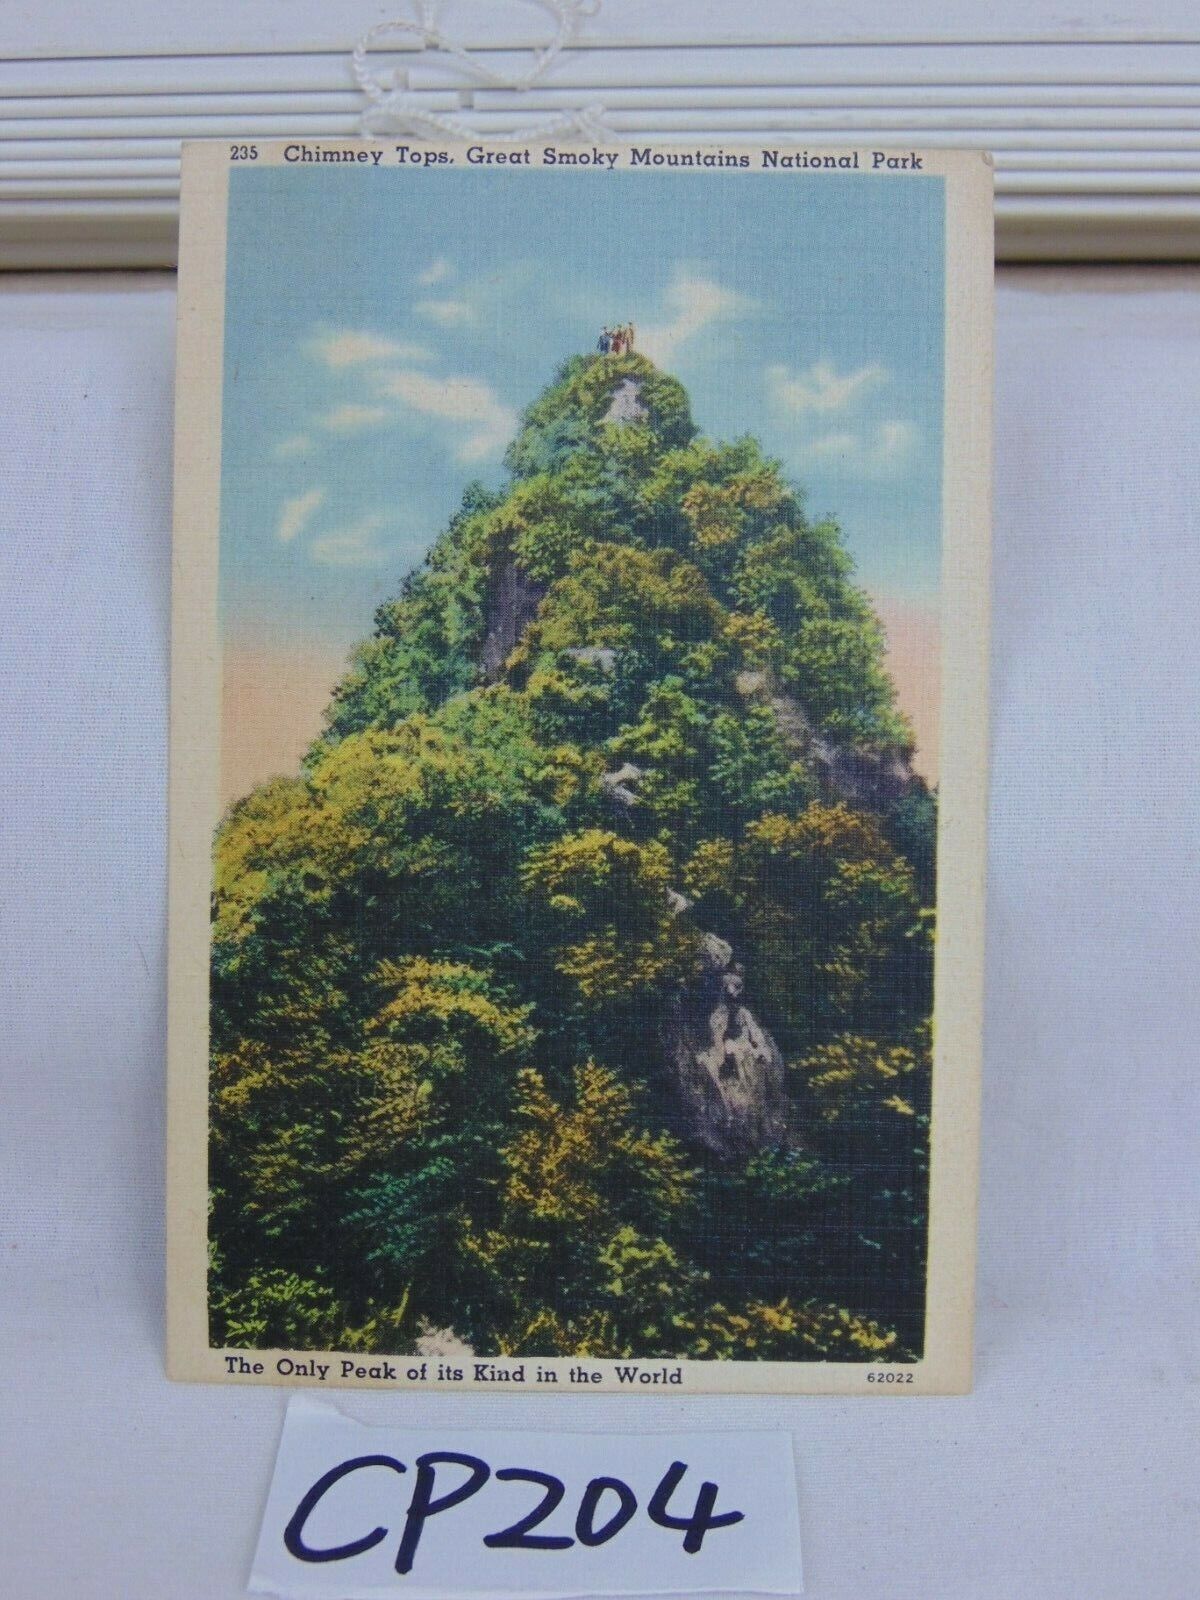 VINTAGE POSTCARD LINEN CHIMNEY TOPS GREAT SMOKY MOUNTAINS NATIONAL PARK 